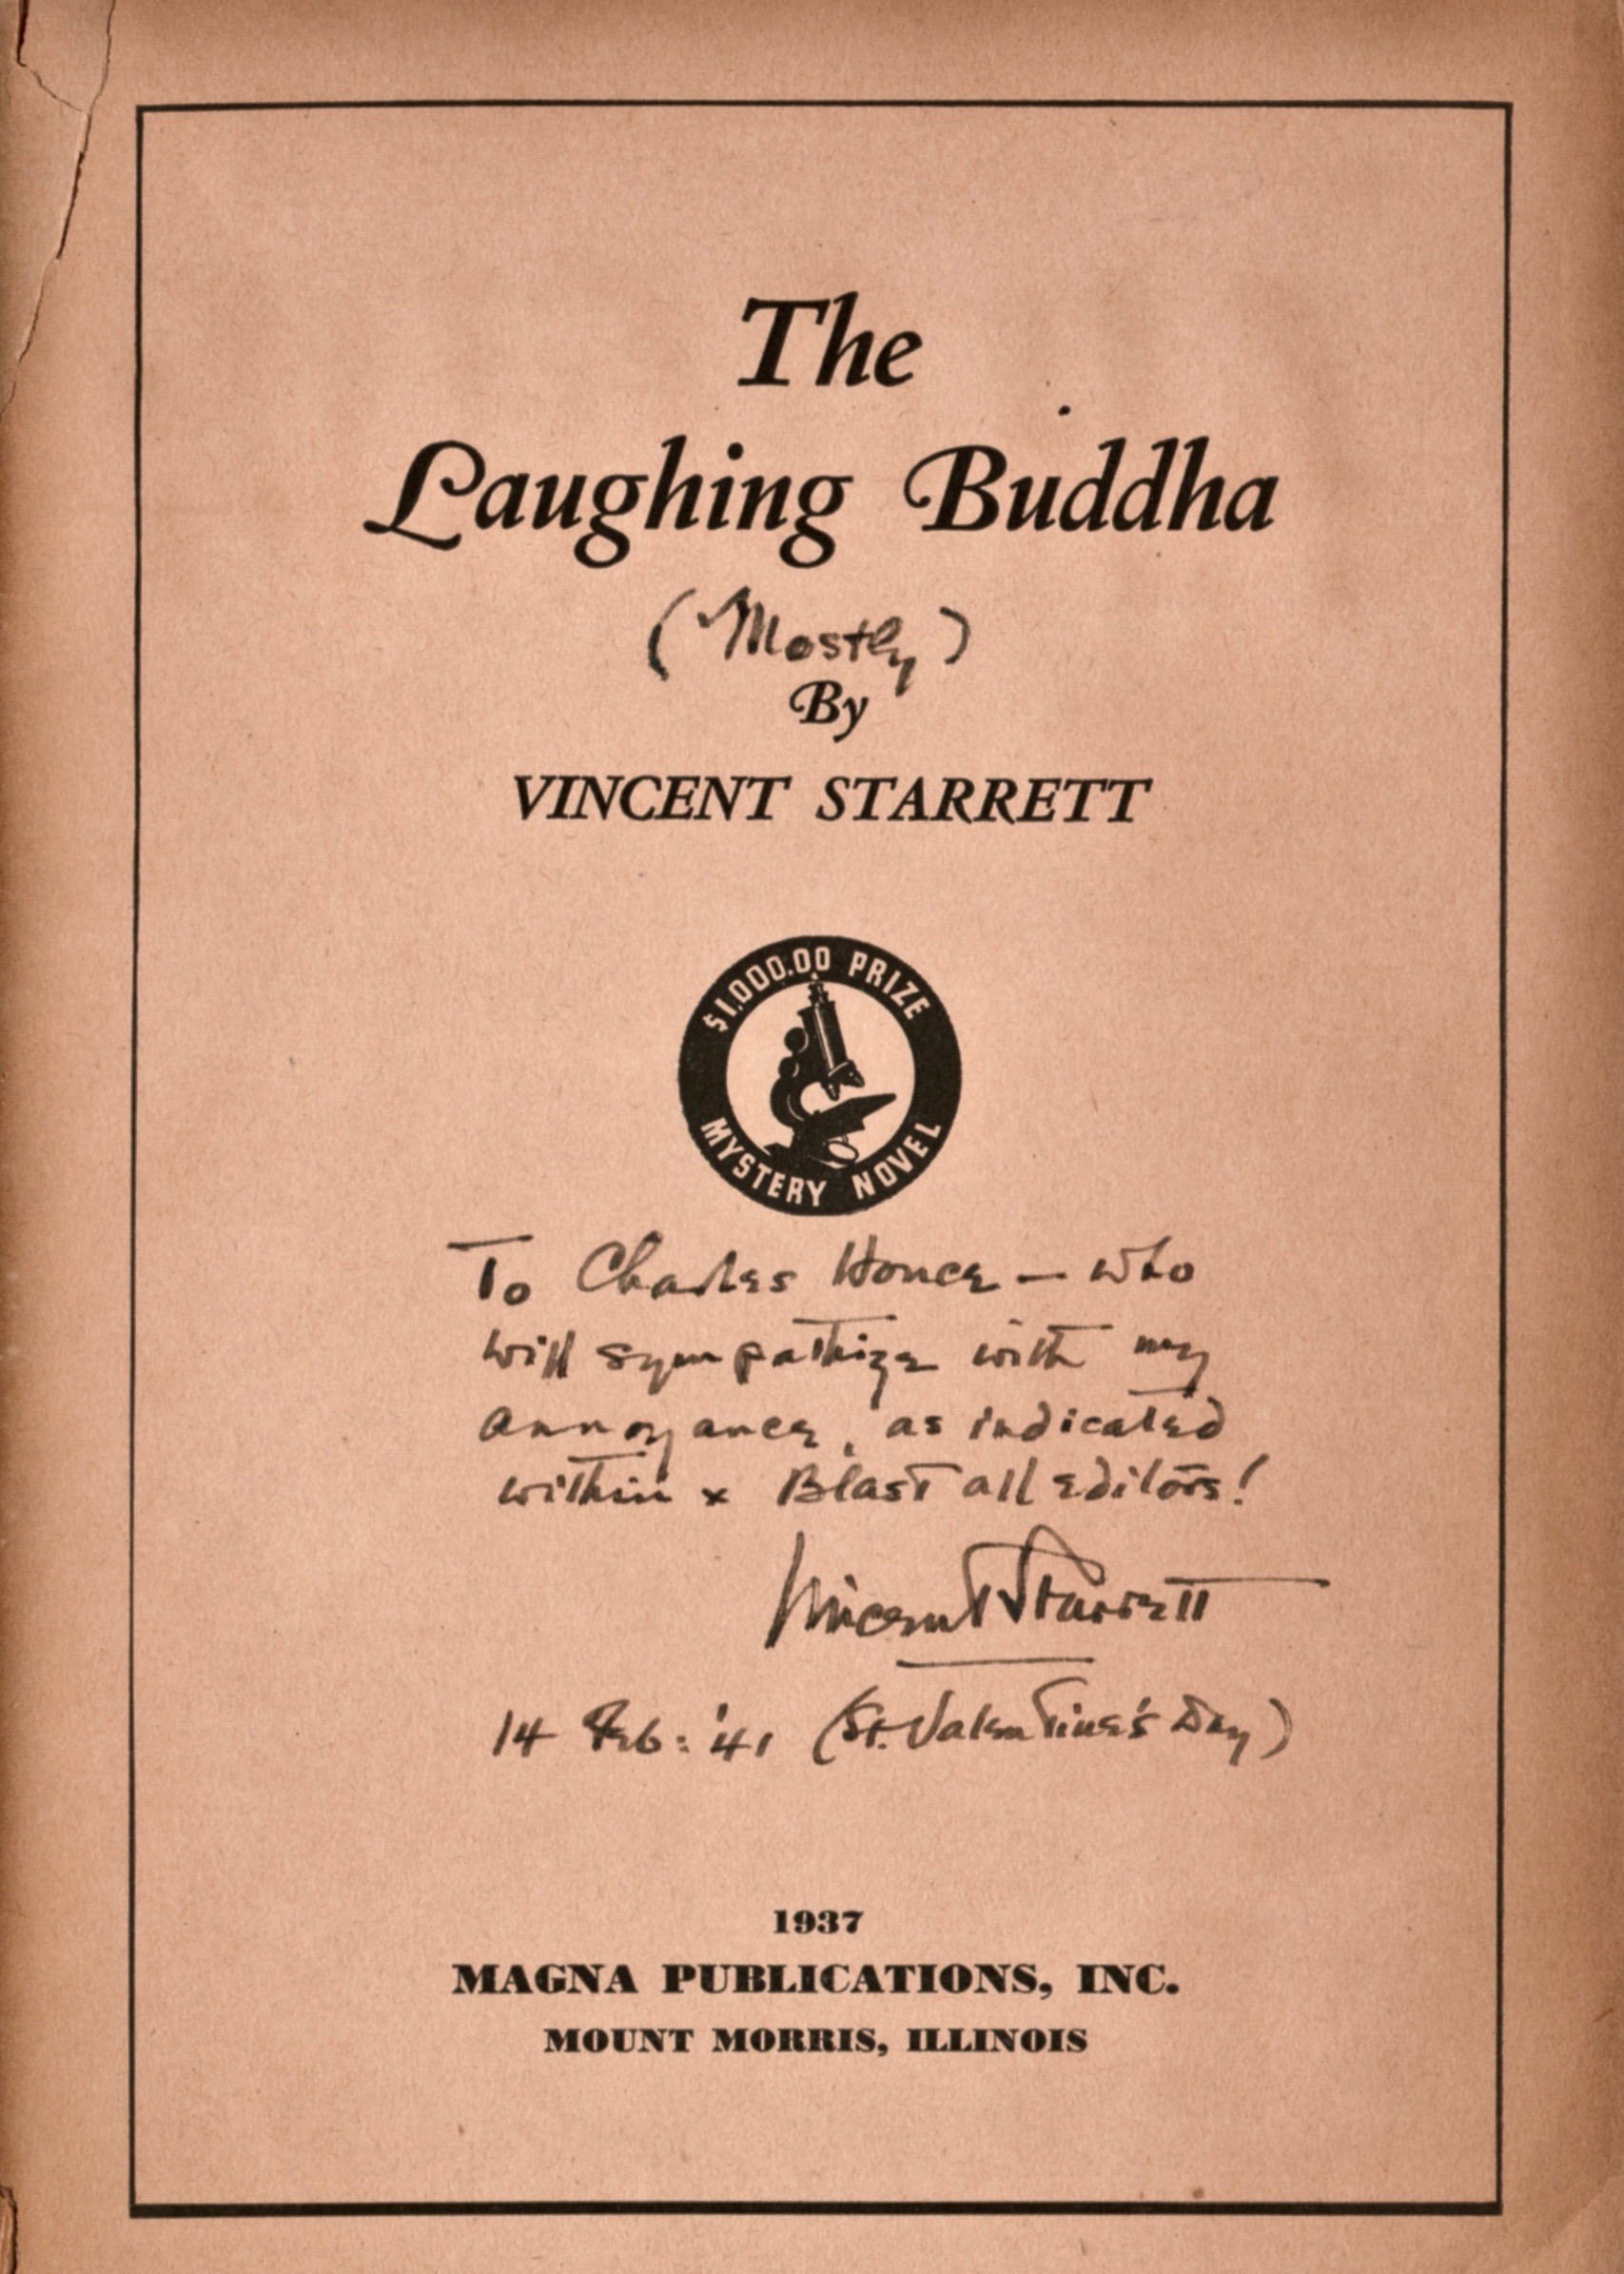 Laughing Buddha title and half title 2.jpg